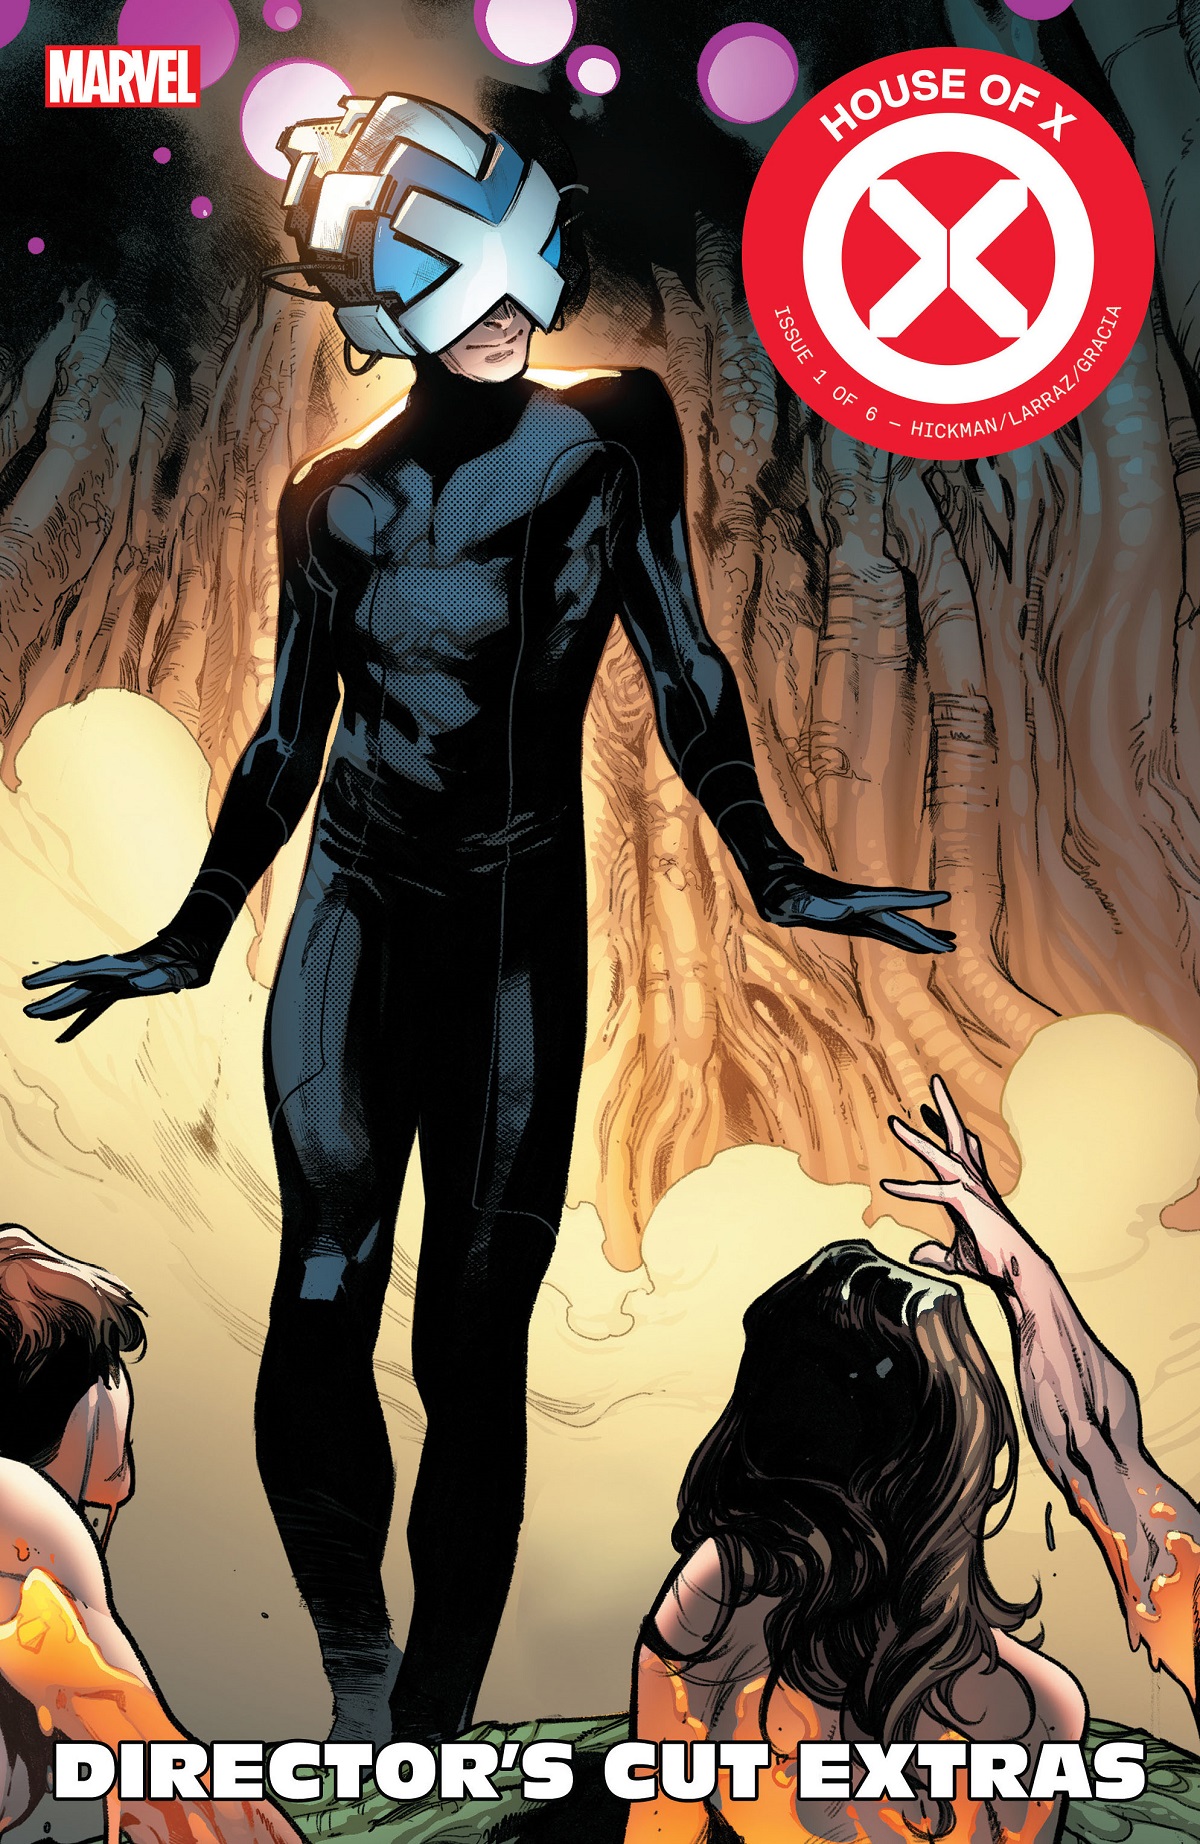 HOUSE OF X 1 DIRECTOR'S CUT EDITION (2019) #1